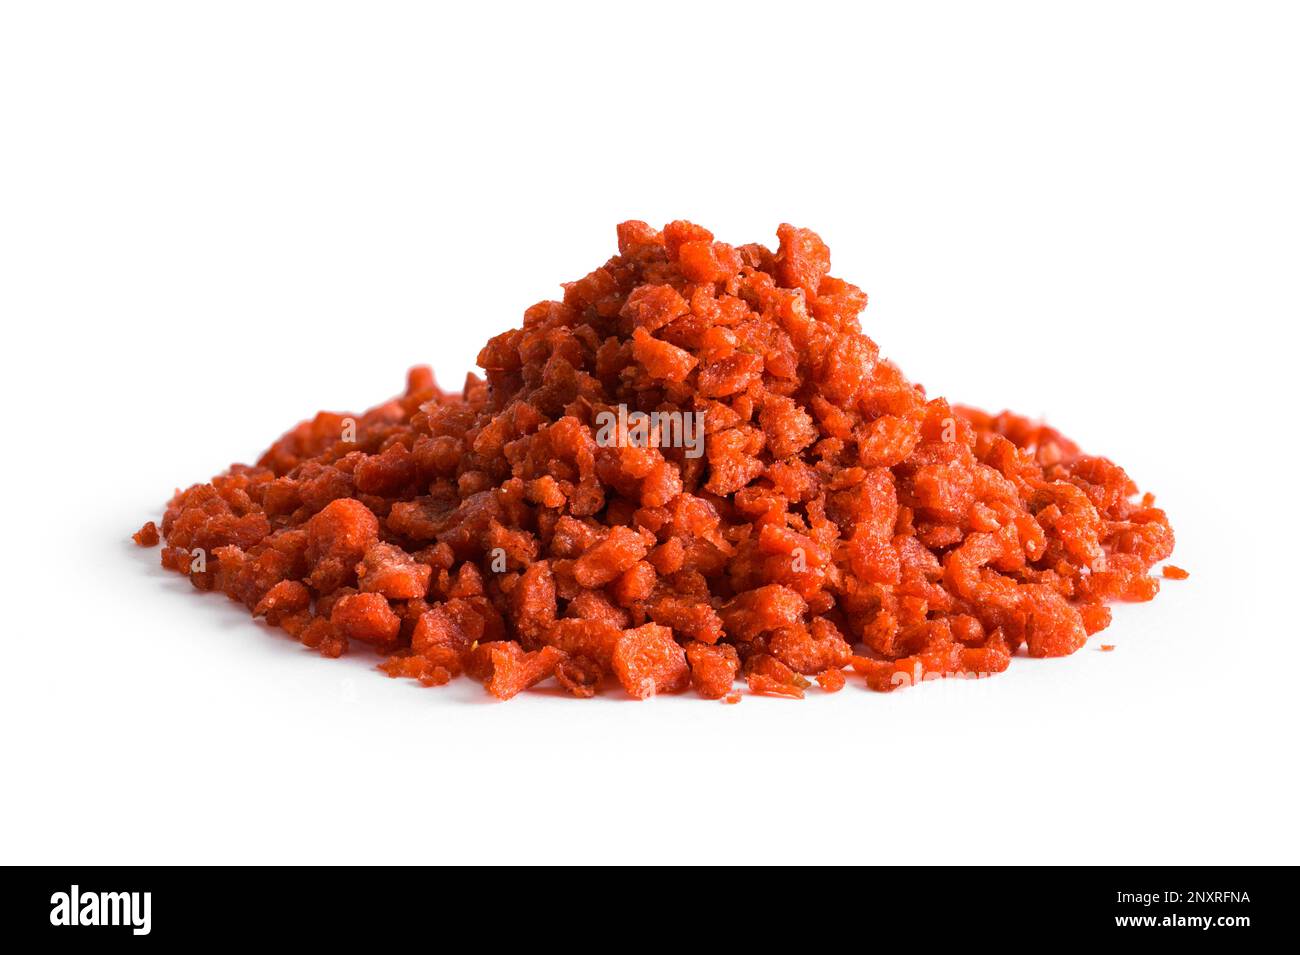 Small Pile of Bacon Pieces Cut Out on White. Stock Photo